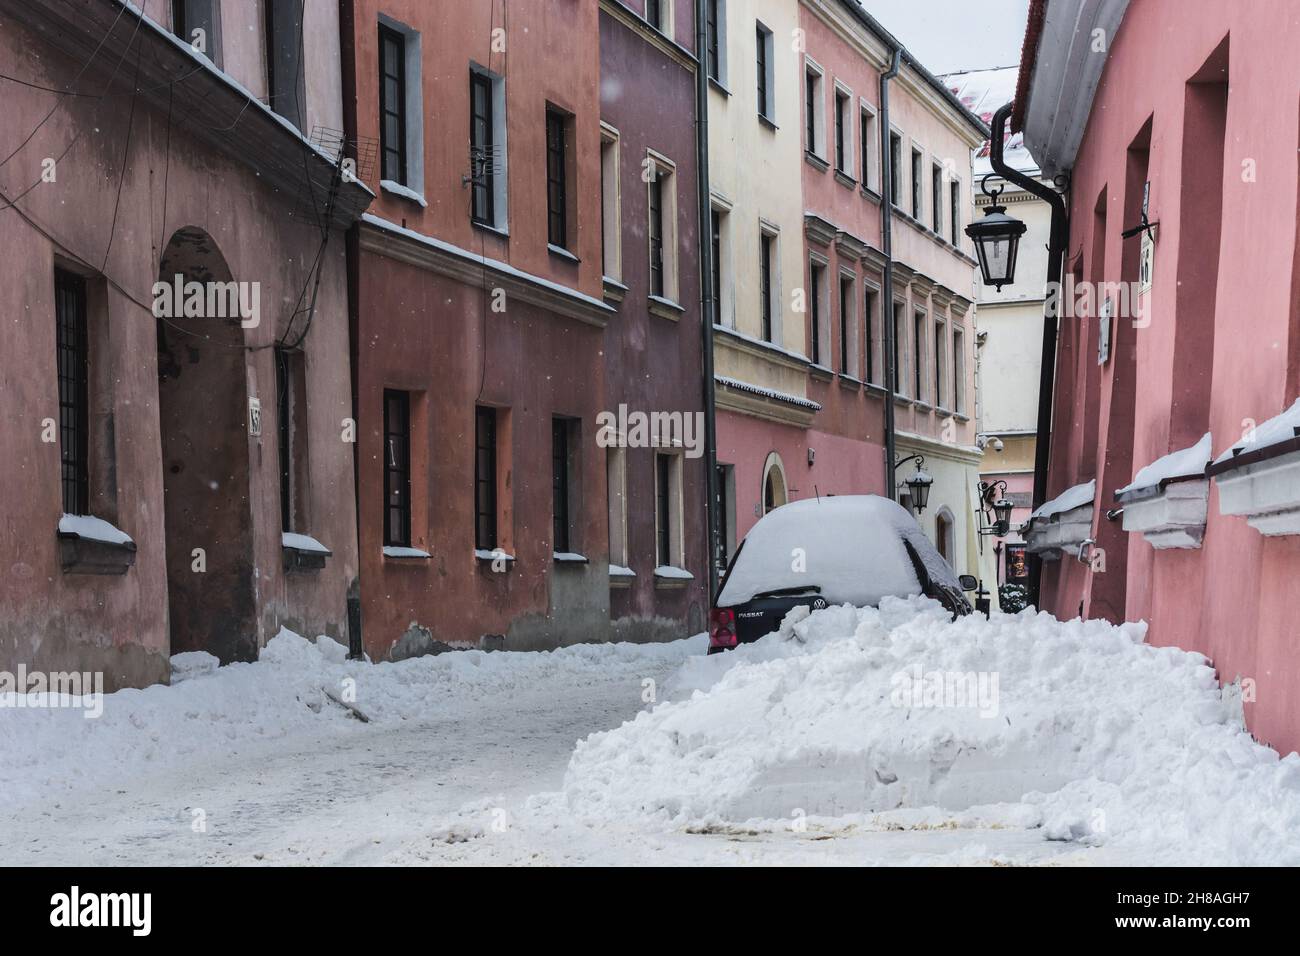 Lublin, Poland - February 13, 2021: Car parked in heavy snow at Jezuicka street in winter Stock Photo